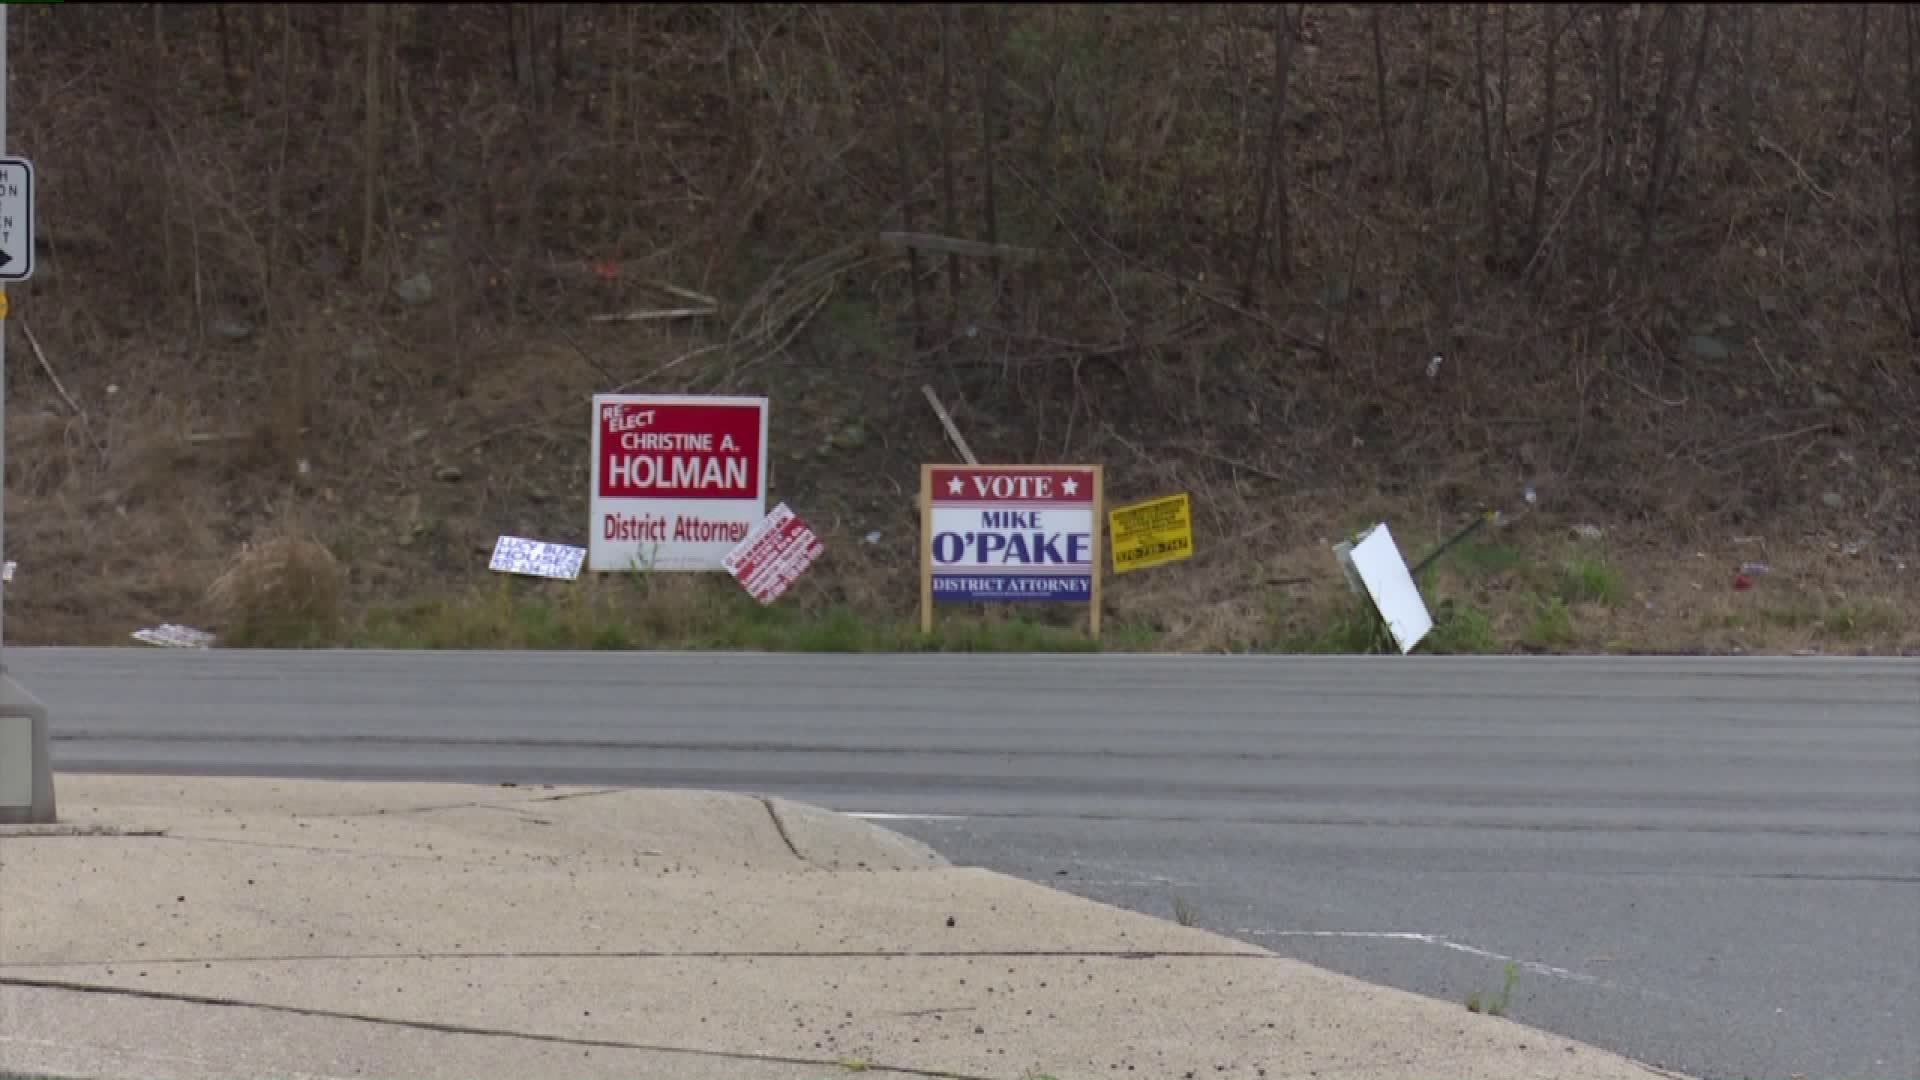 Schuylkill County District Attorney Candidates Prepare for Election Day